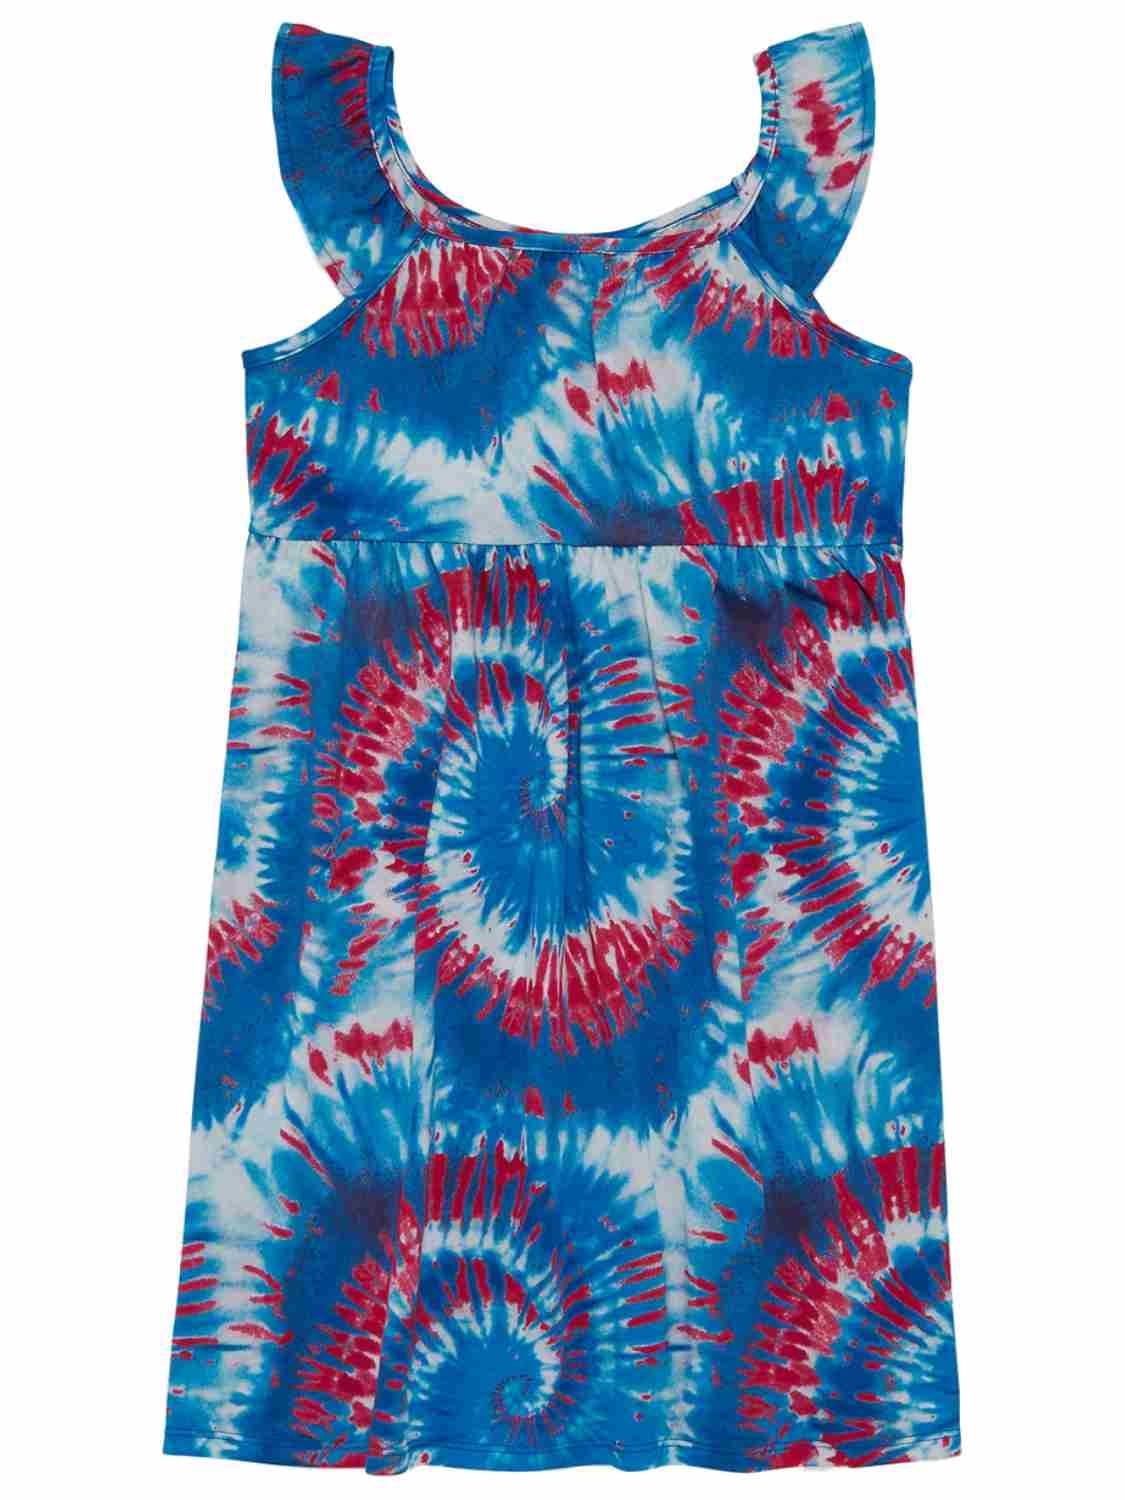 red white and blue tie dye dress